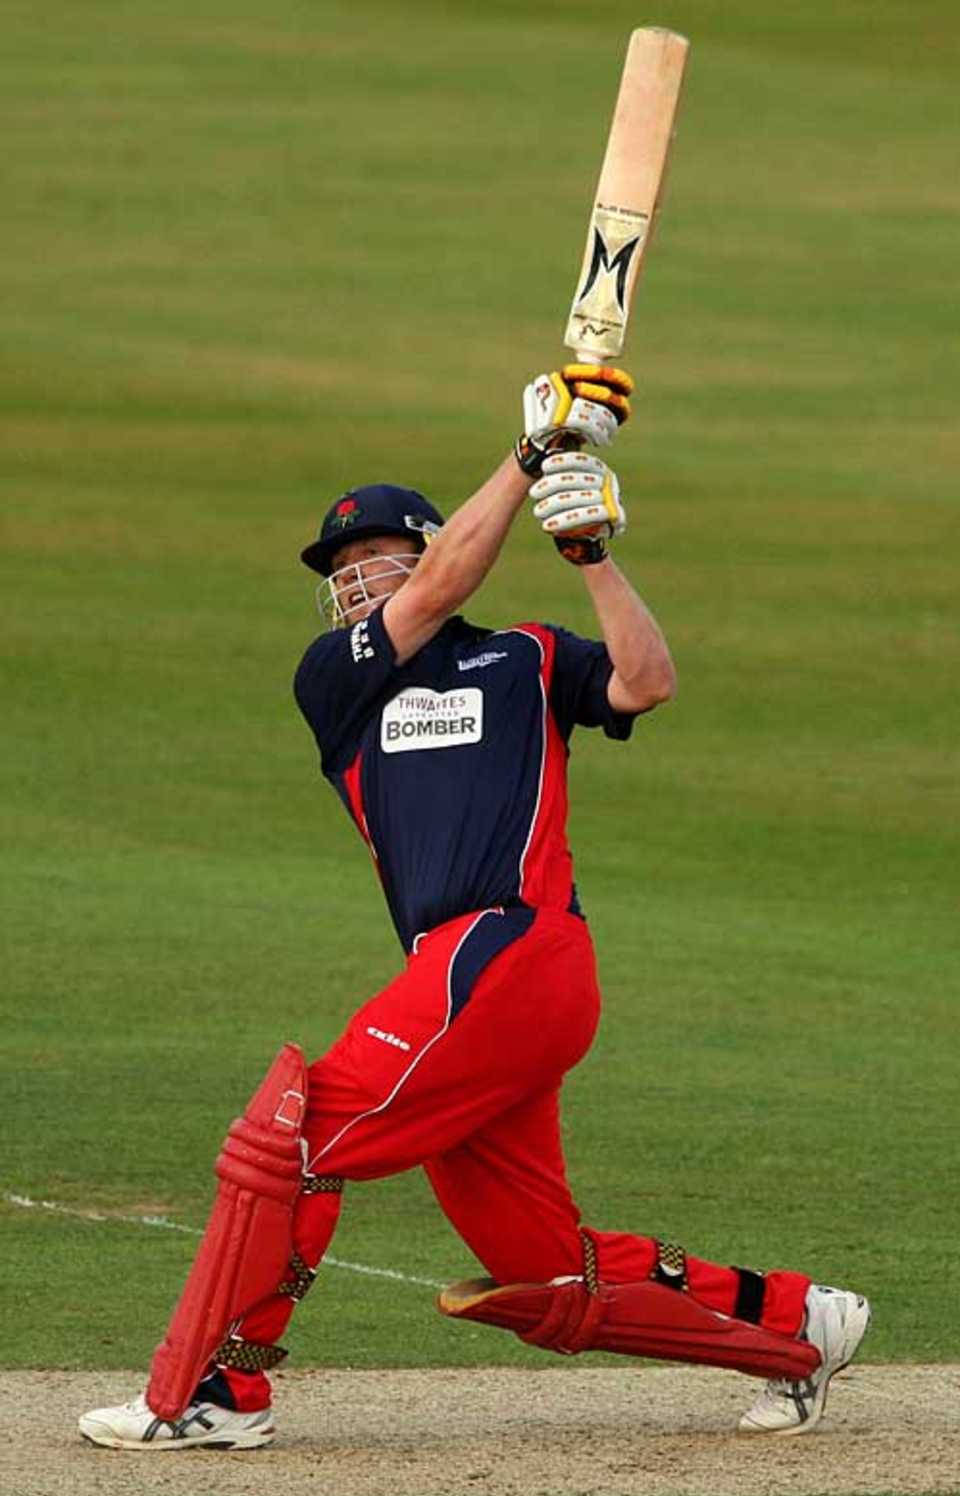 Andrew Flintoff hit 53 as Lancashire fell short in their chase, Middlesex v Lancashire, Twenty20 Cup quarter-final, The Oval, July 8, 2008